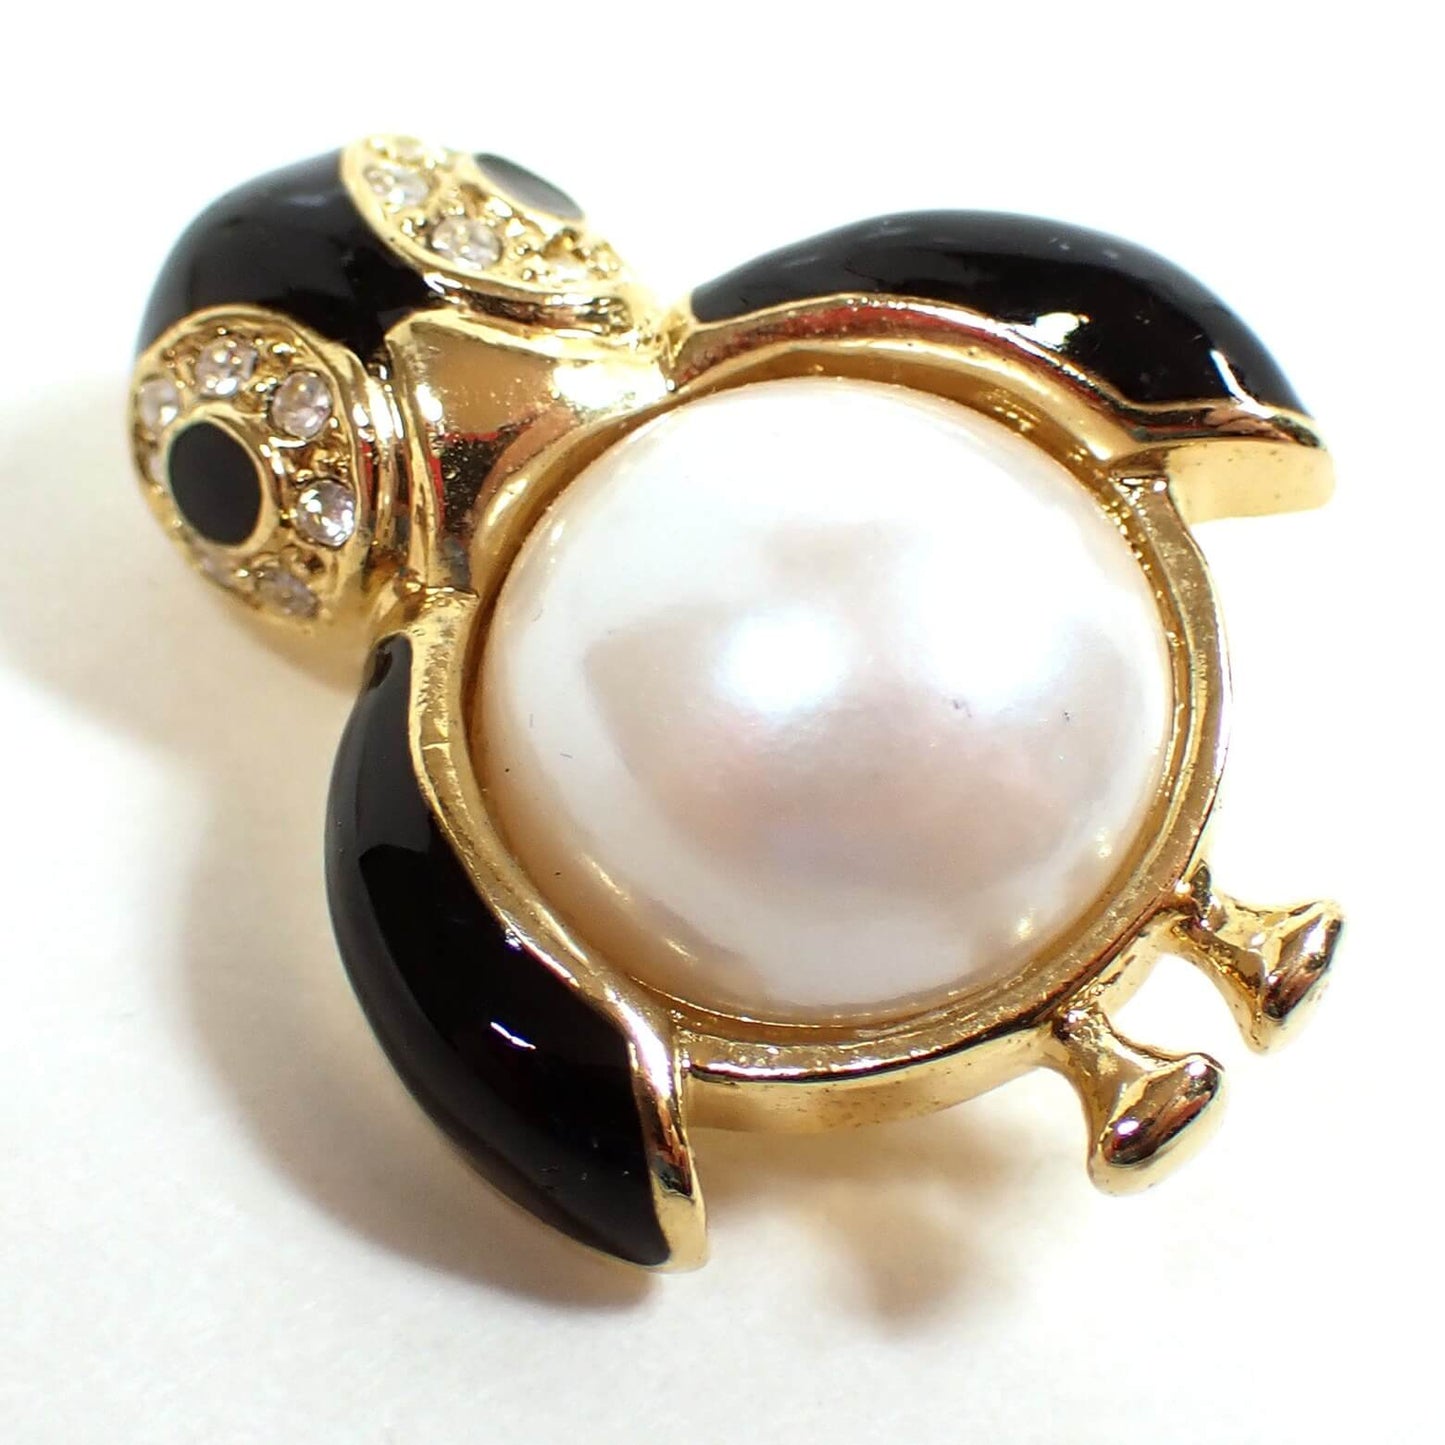 Enlarged front view of the small Marvella retro vintage brooch pin. It is shaped like a rounded penguin with black enameled head and wings and a plastic faux pearl belly. There are clear glass crystal rhinestones around the eyes. The metal is gold tone plated in color.